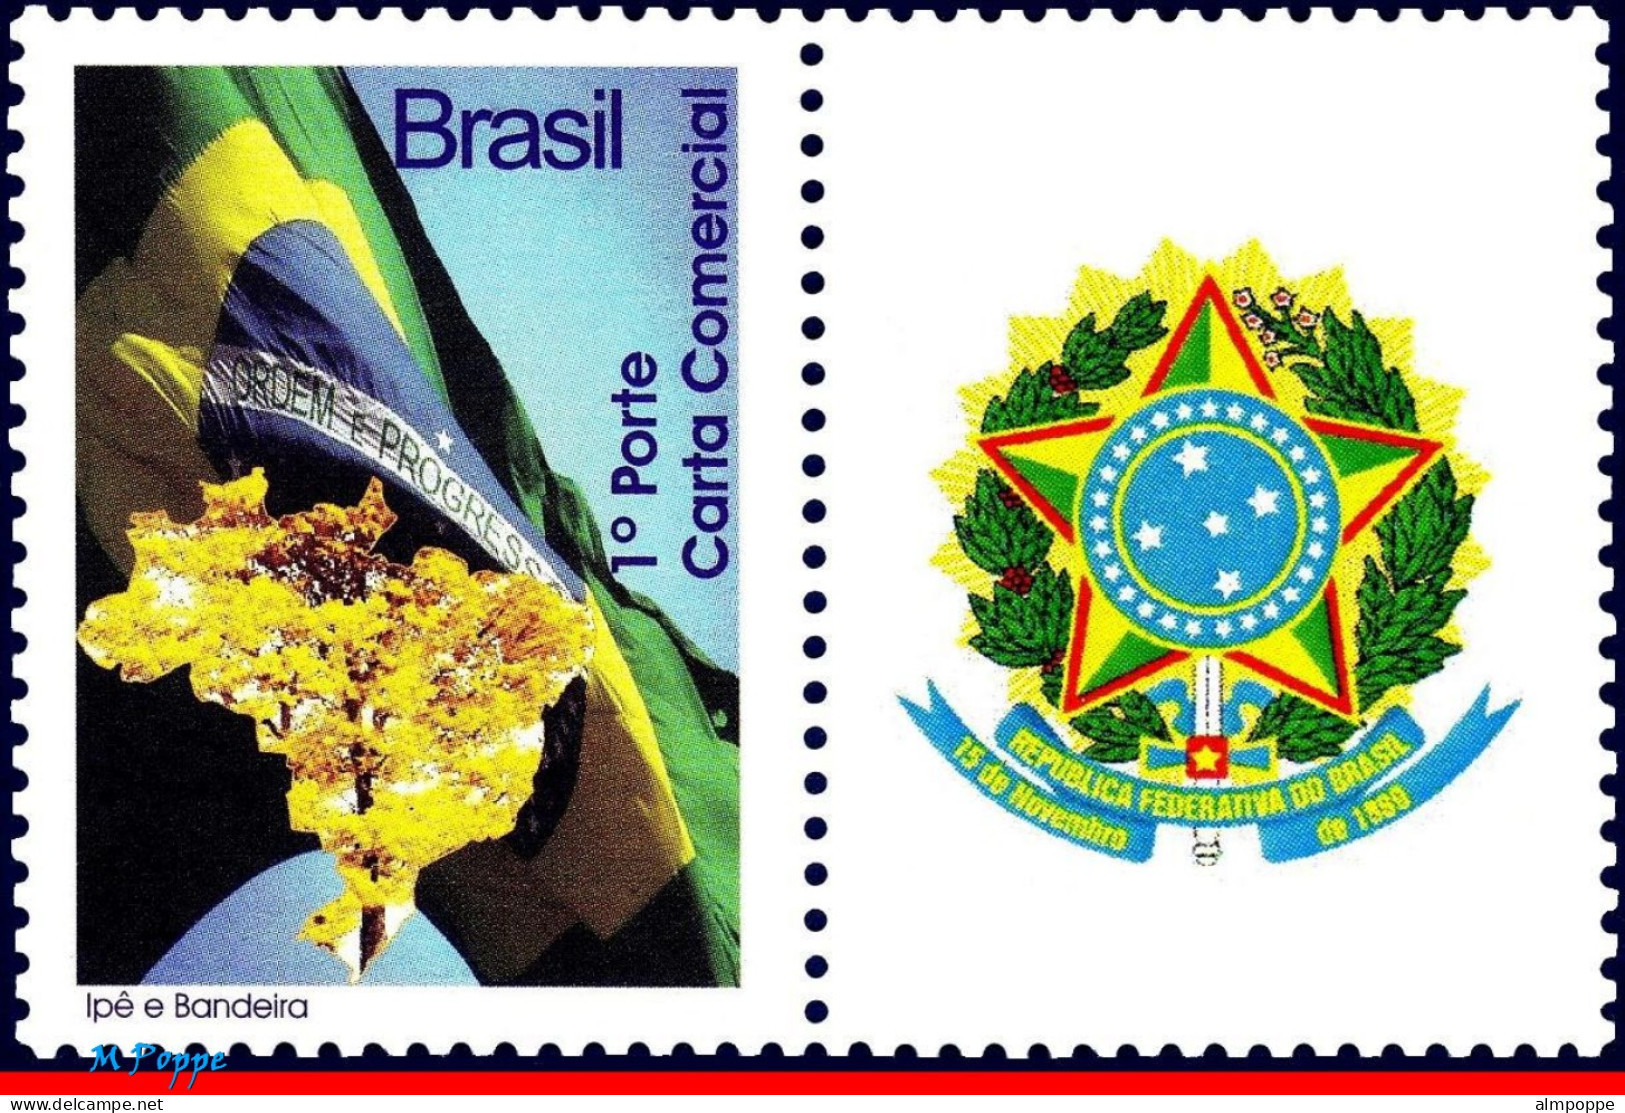 Ref. BR-3080N-1 BRAZIL 2009 - IPE WOOD VE, MAPS, FLAGS,COAT OF ARMS, PERSONALIZED MNH, COATS OF ARMS 1V Sc# 3080N - Timbres